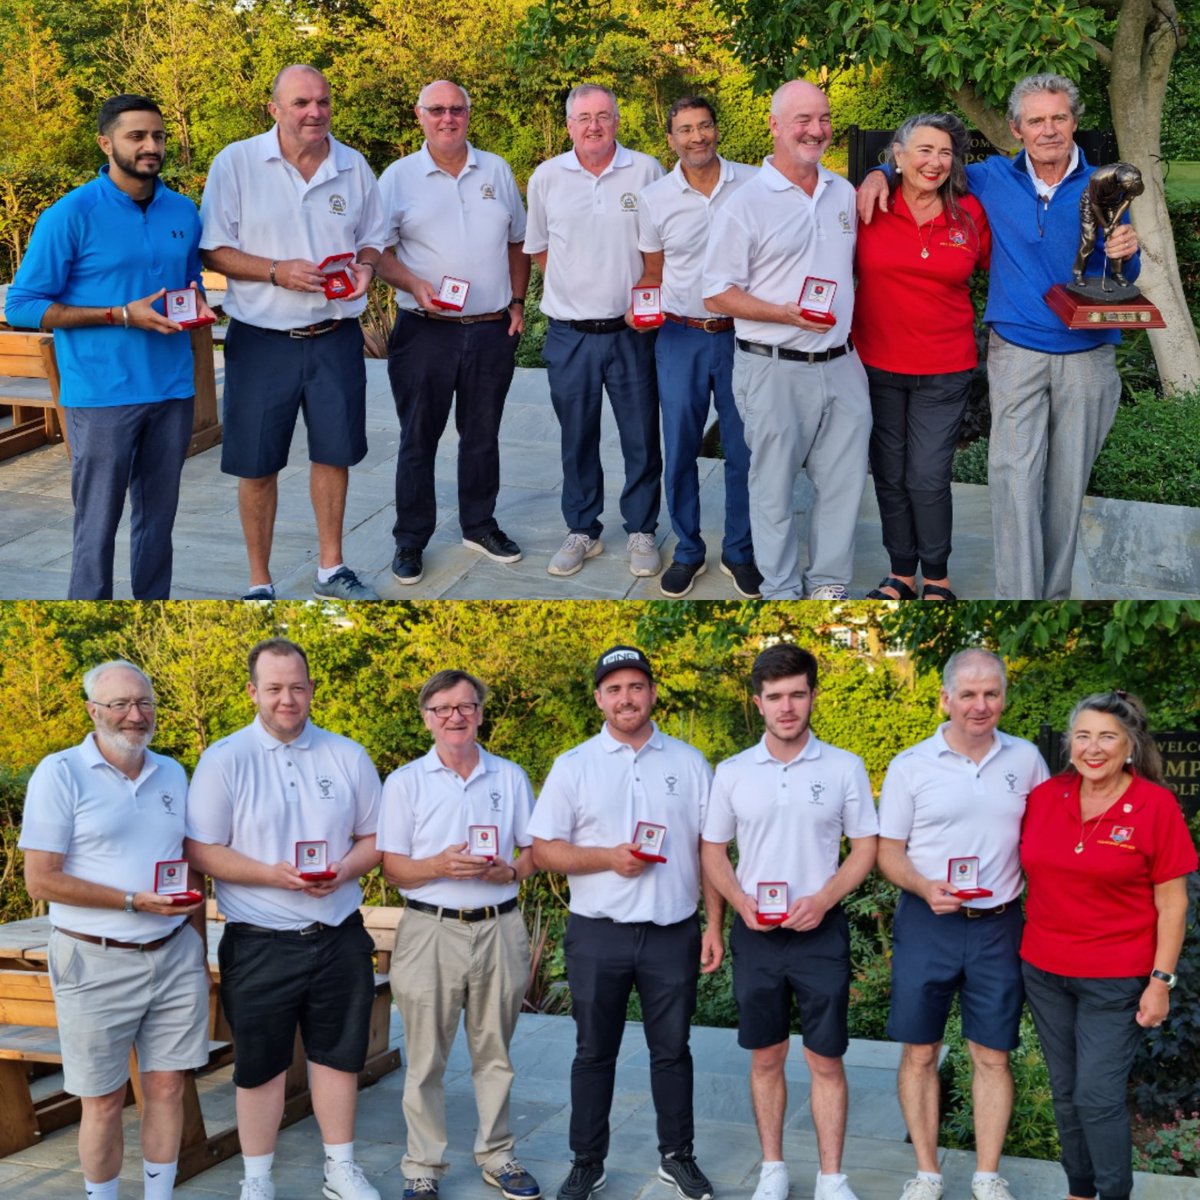 Congratulations to @HendonGolf for winning the Middlesex Sixes. They defeated defending champions @crewshillgolf at @gclub_h 2-1 in the final.